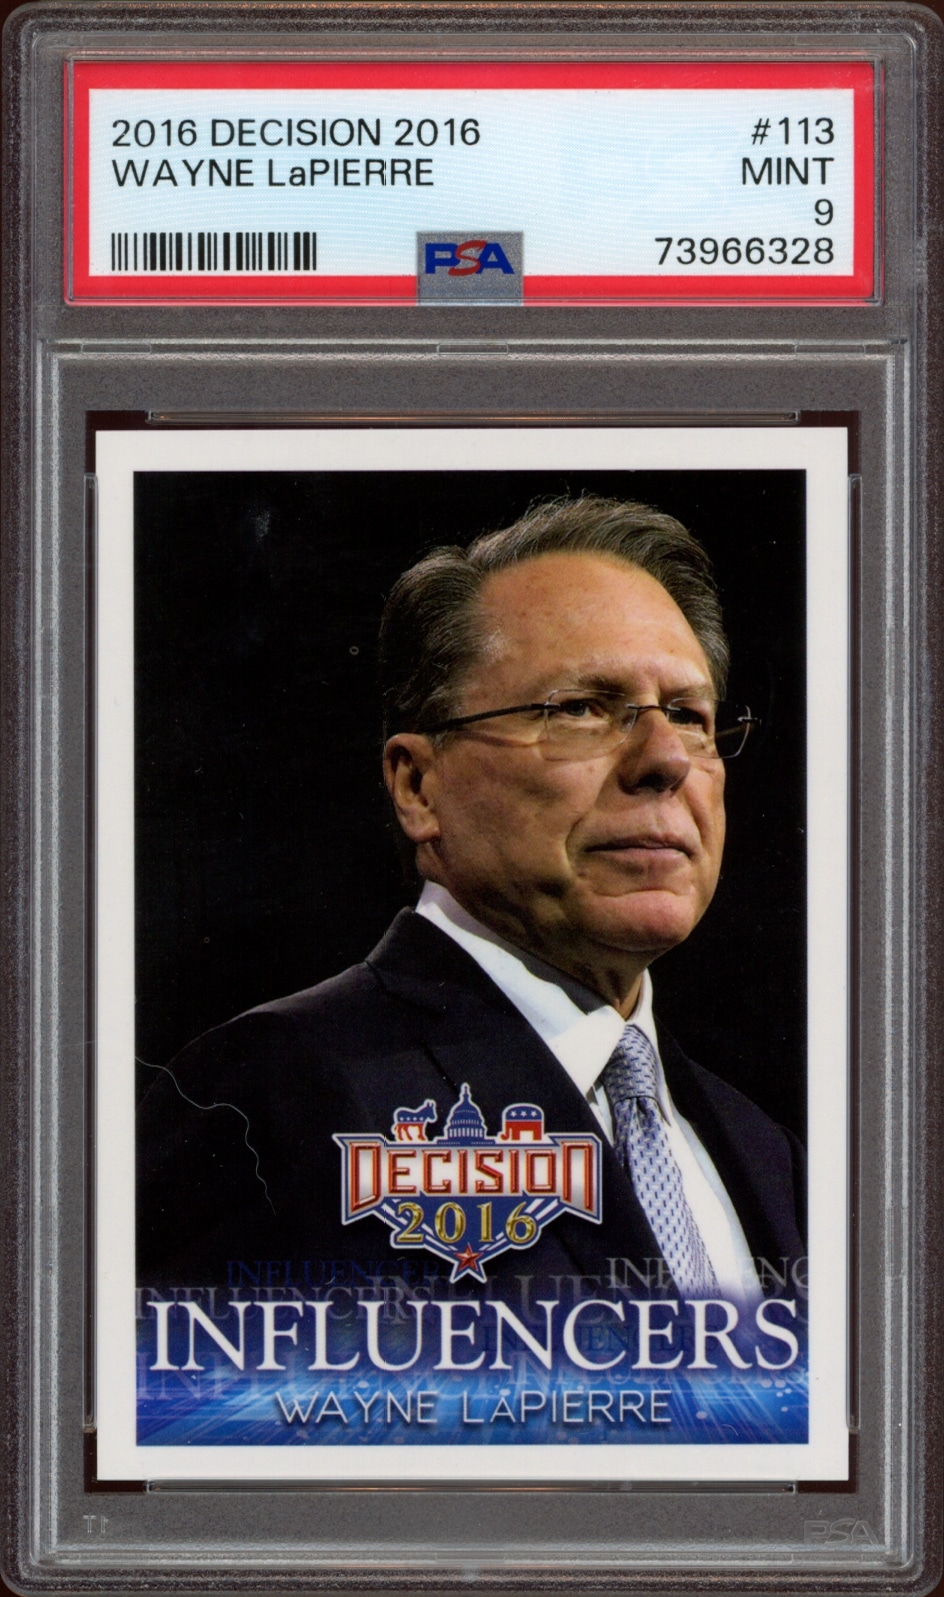 PSA 9 rated 2016 Leaf Decision trading card featuring influencer Wayne LaPierre.